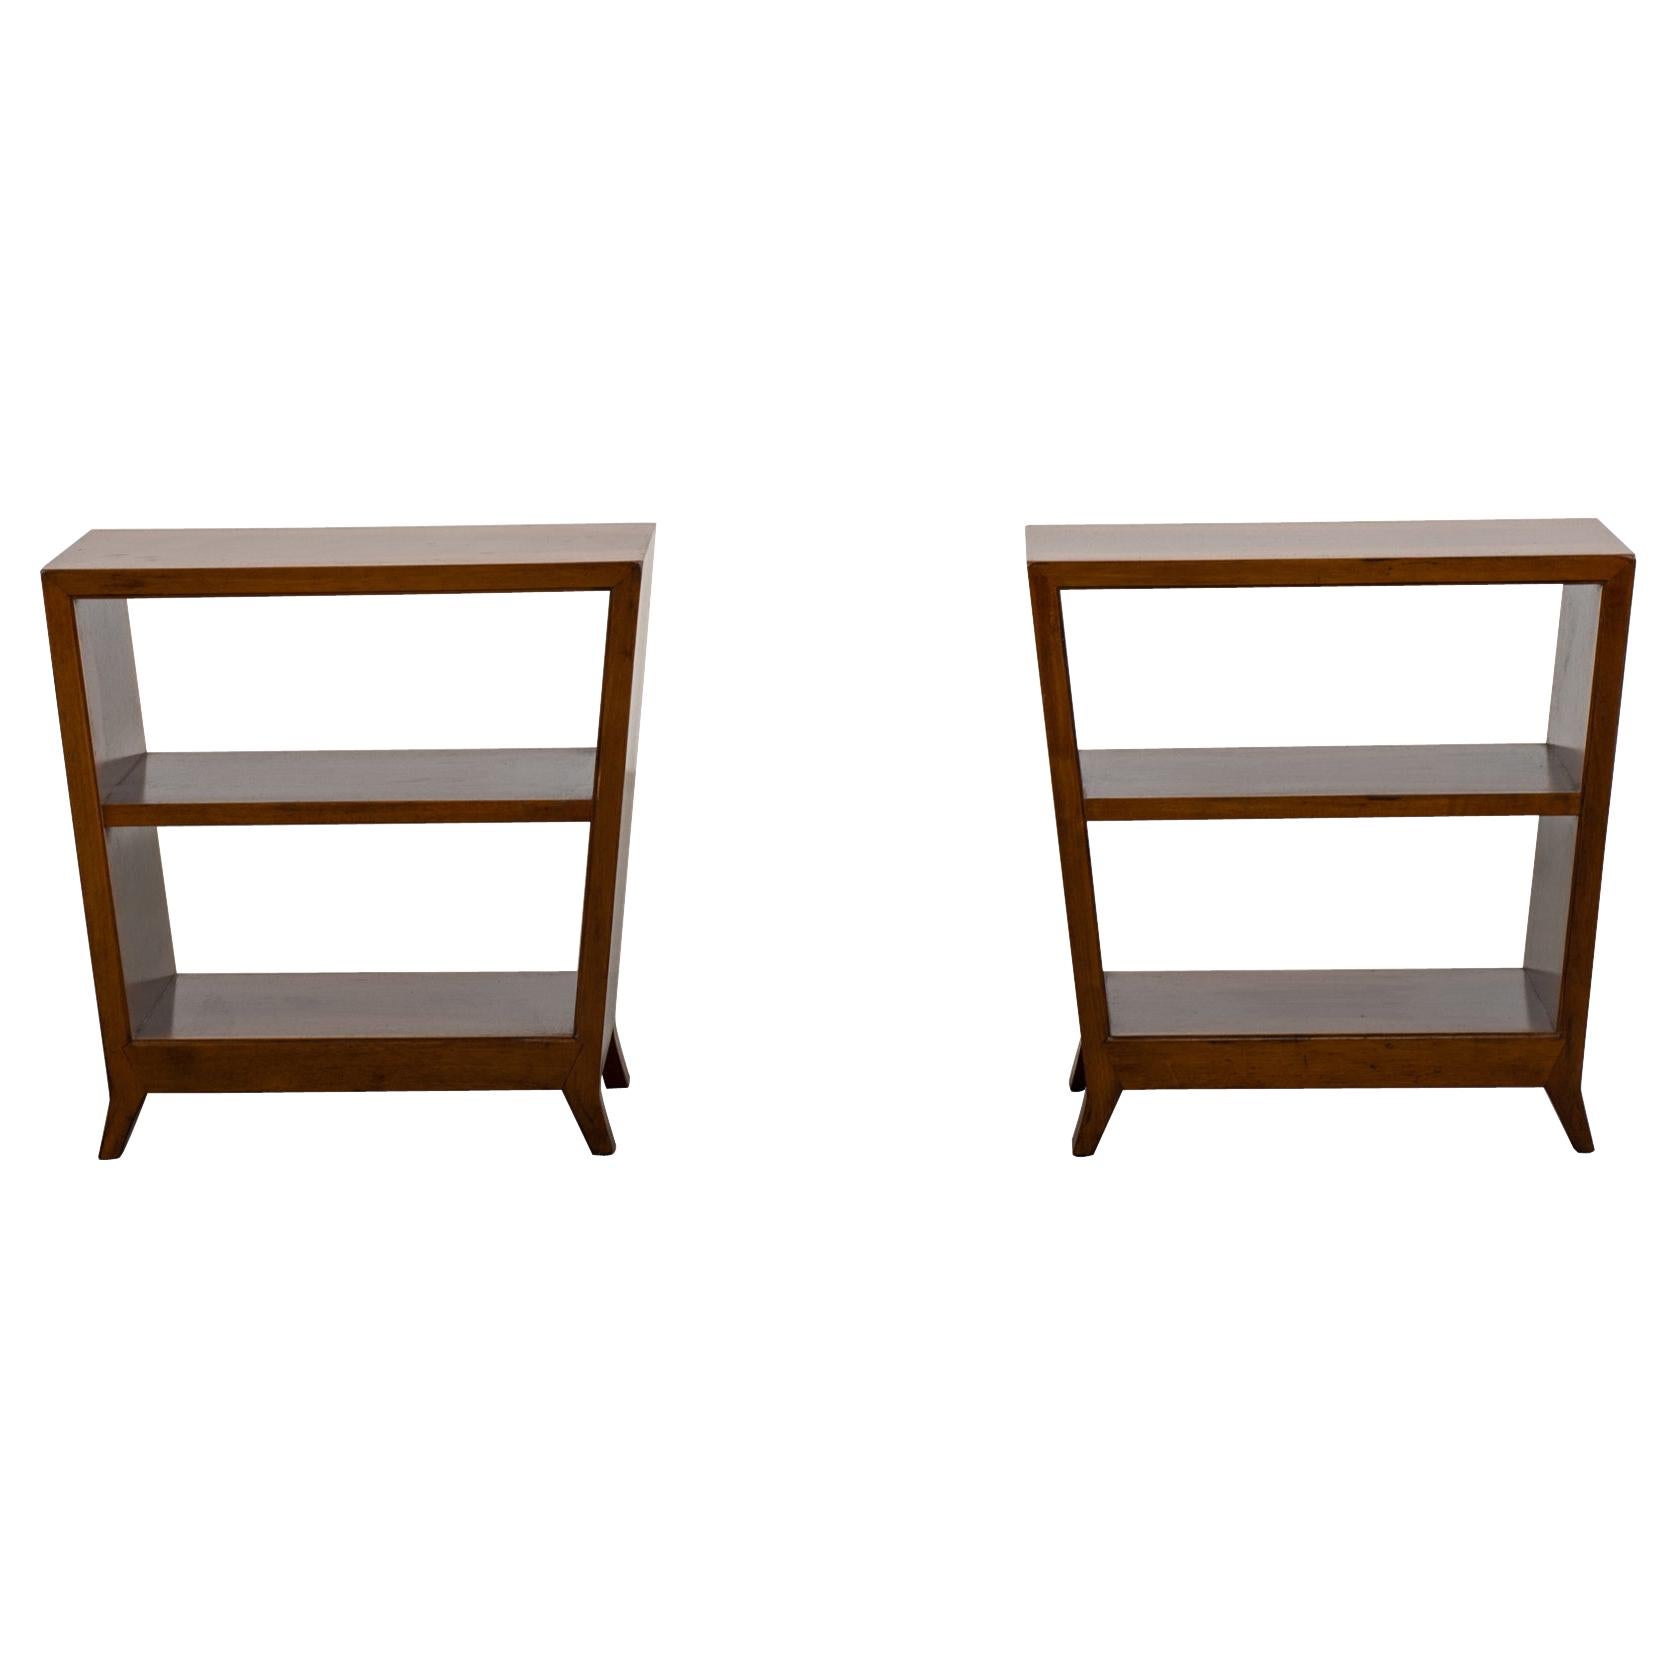 Gio Ponti Set of Two Side Tables with Shelves in Walnut Schirolli 1950s